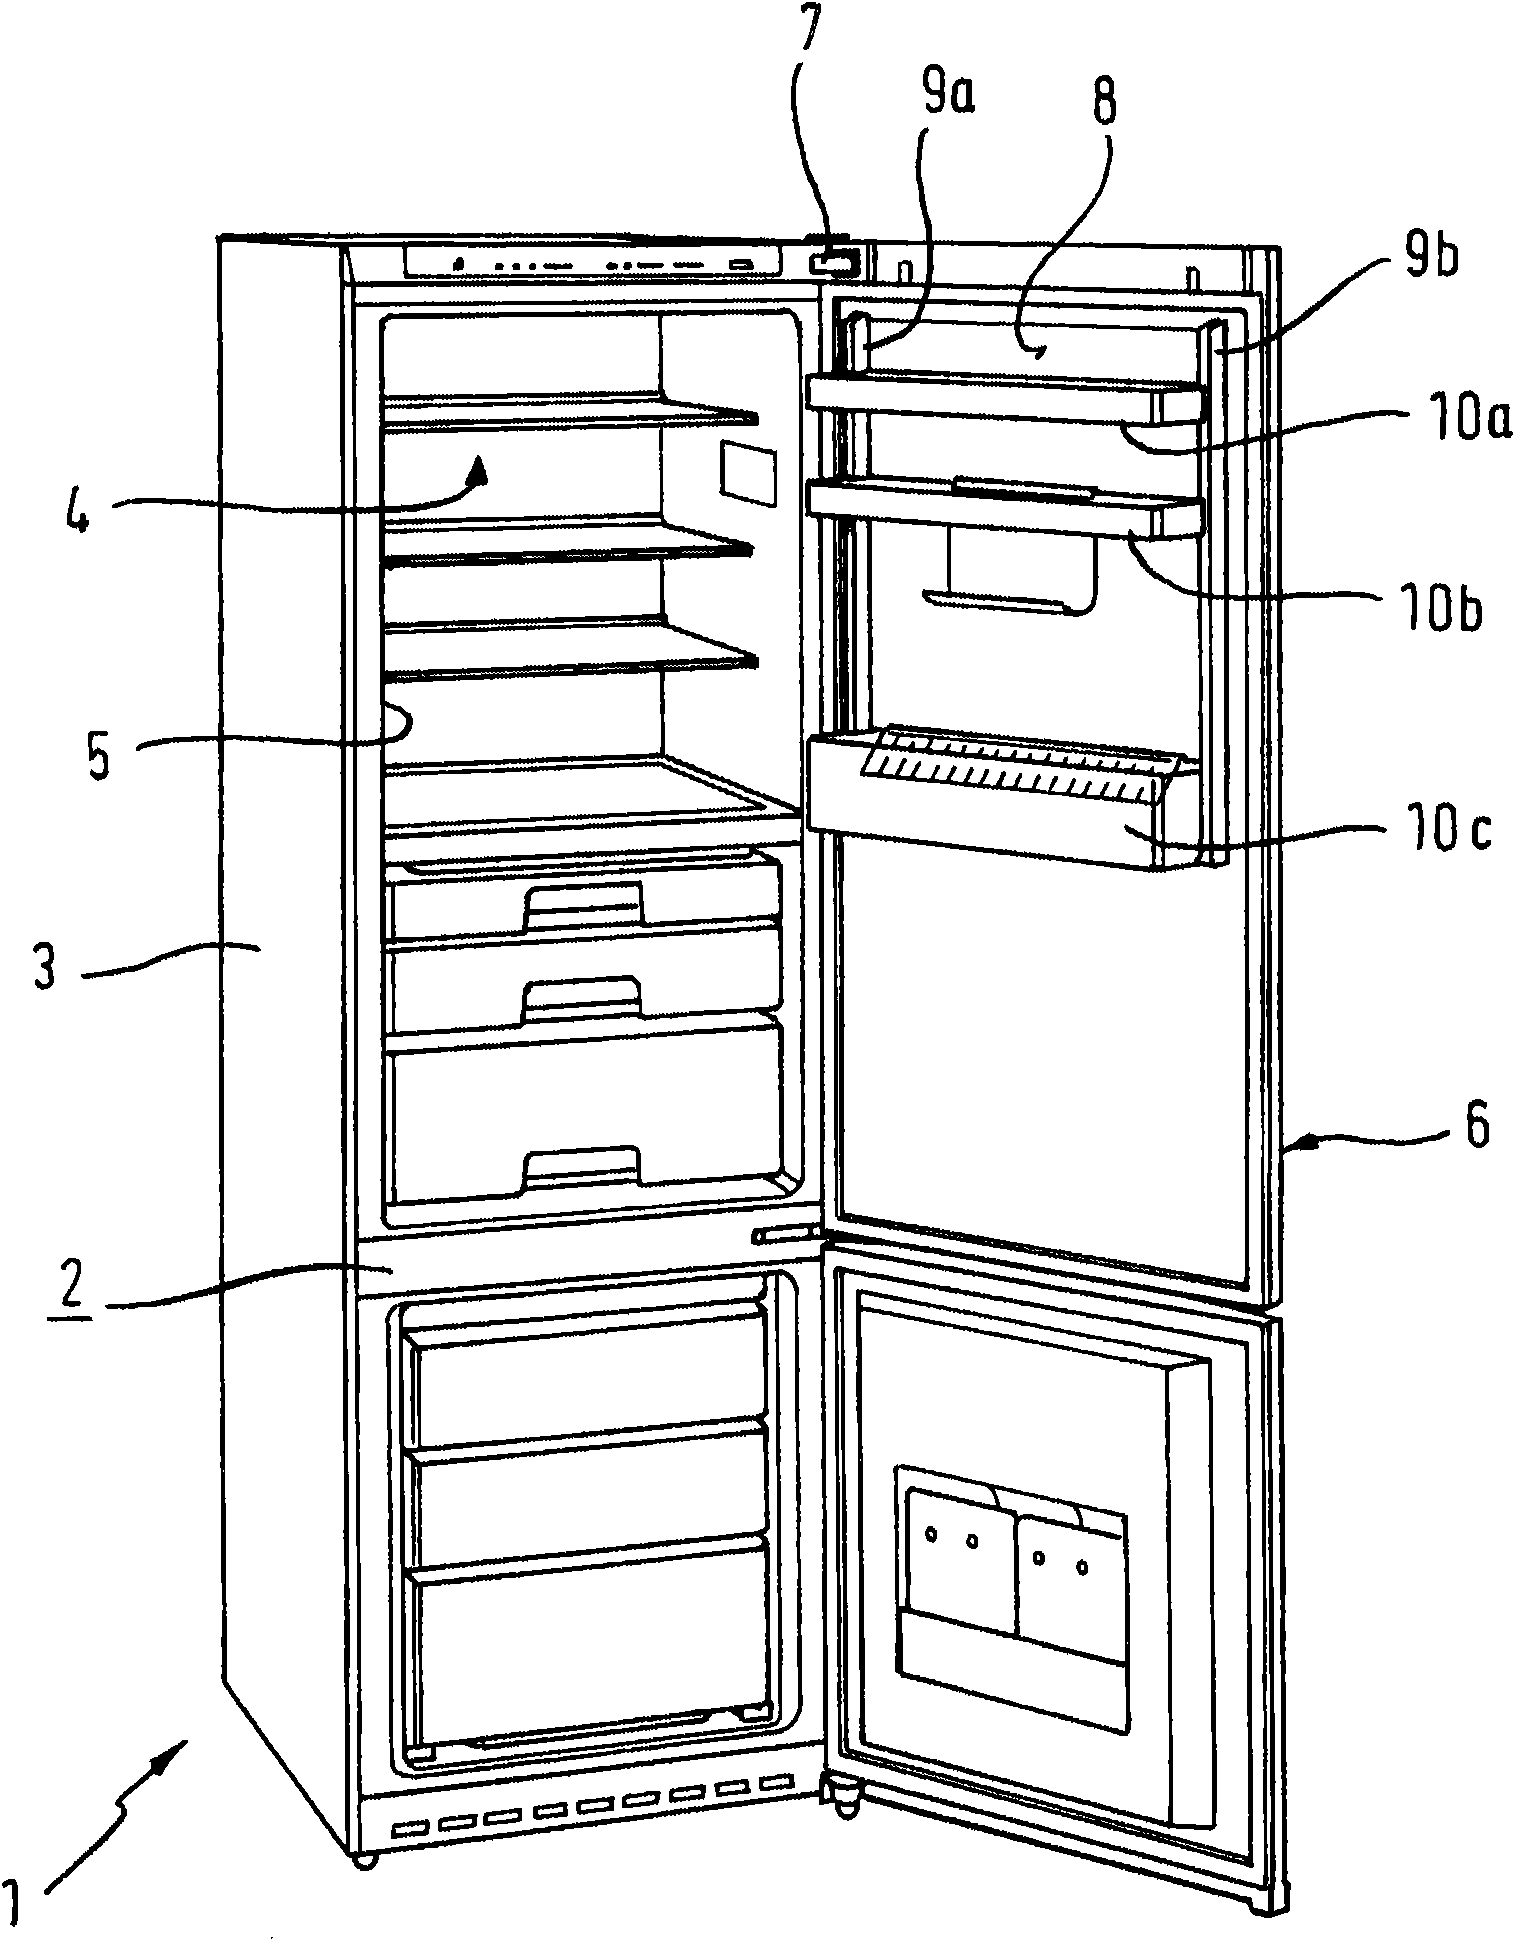 Refrigeration apparatus and associated latching means arrangement for subsequent attachment